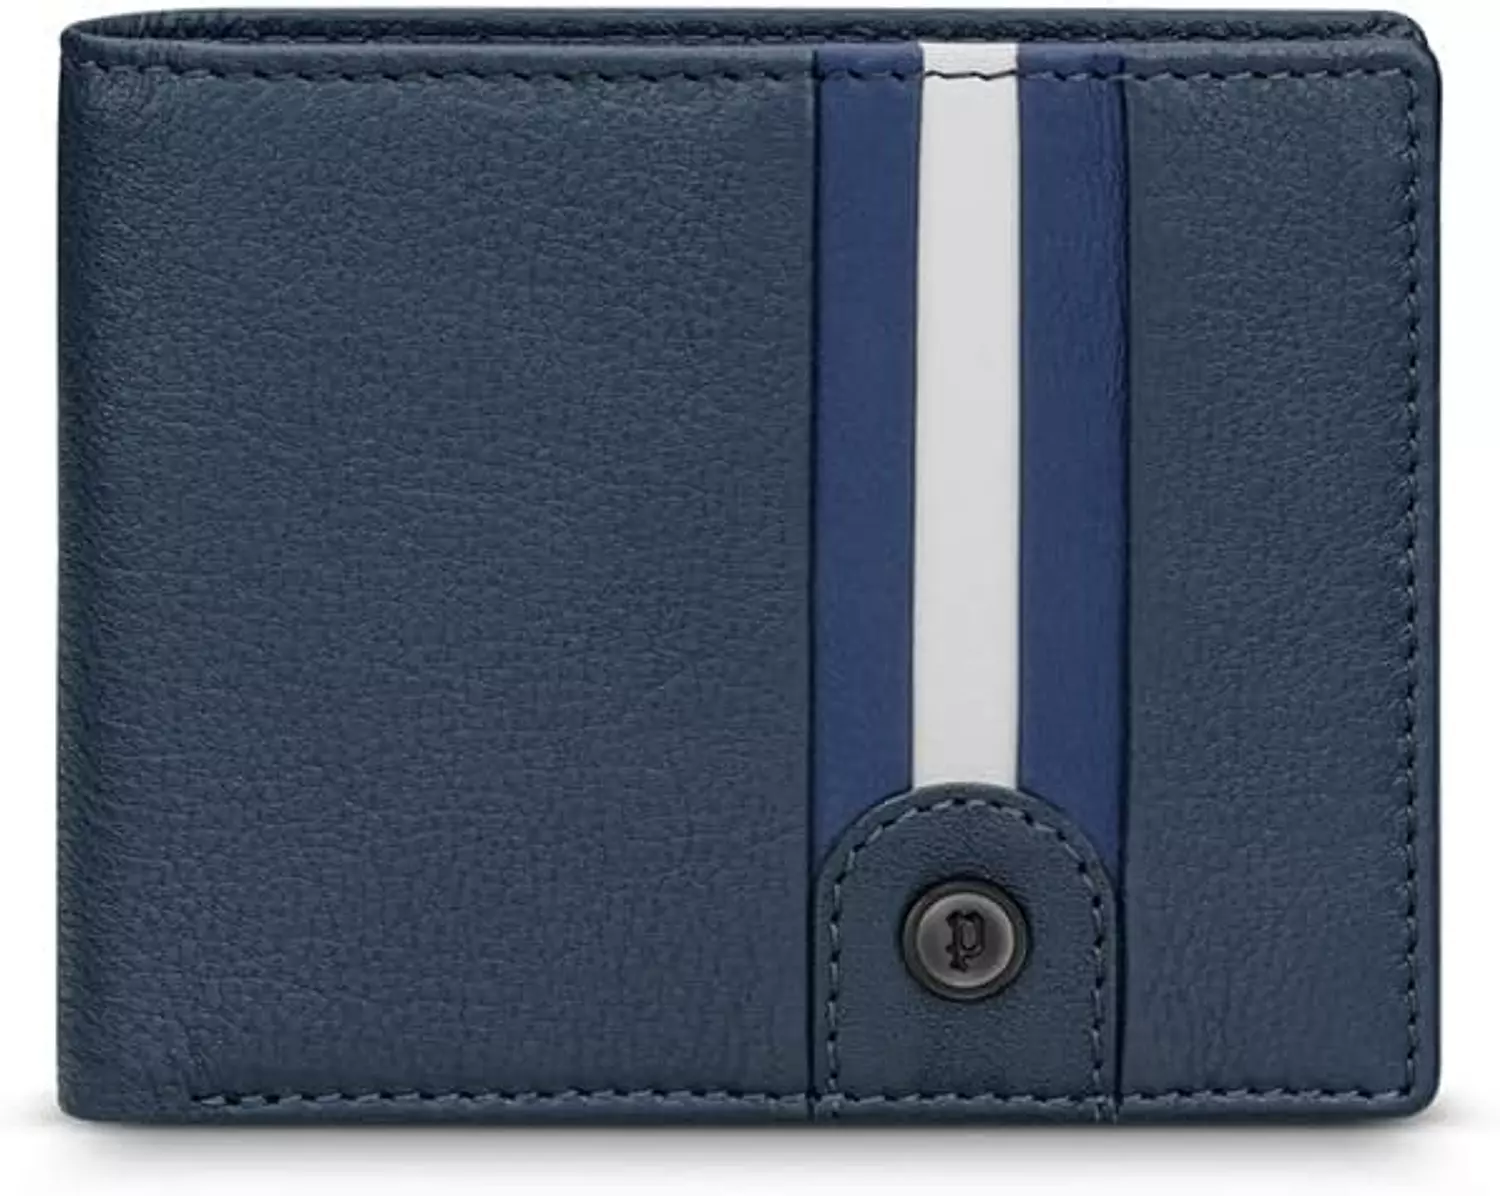 POLICE - Gala Wallet For Men Blue And Off White - PELGW2203202 0